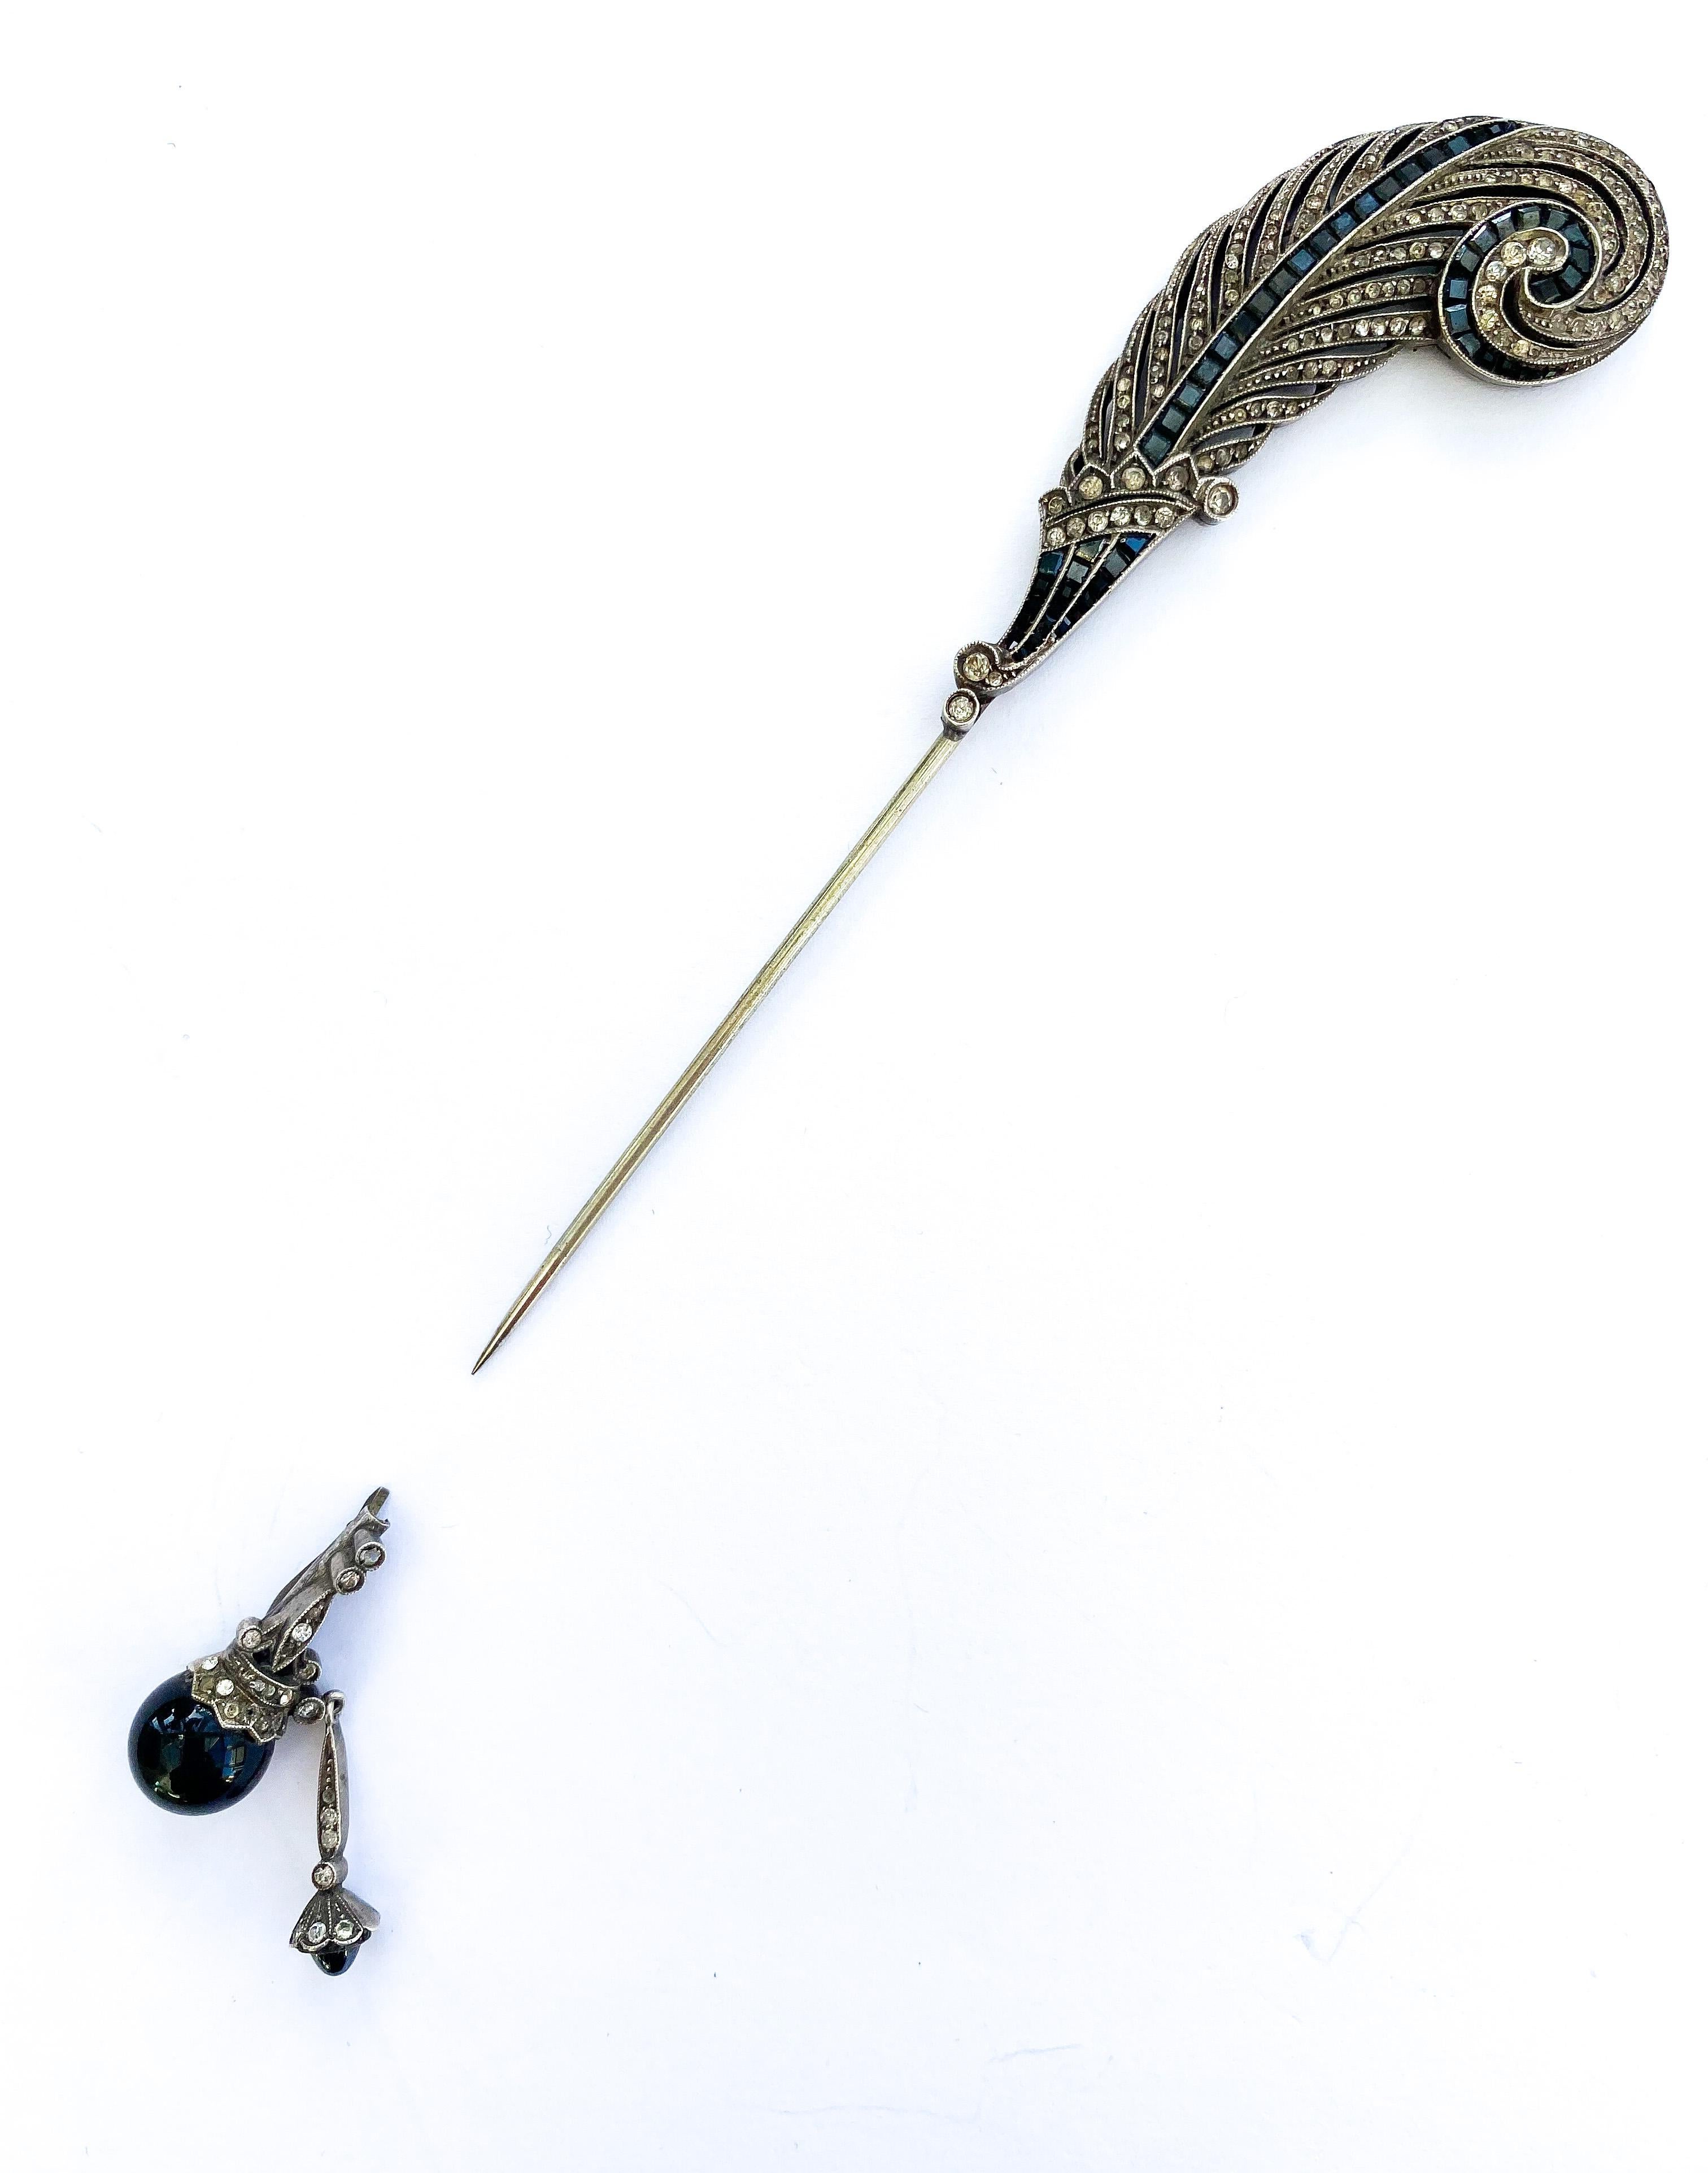 An exquisite and very stylish French  'jabot' pin, with a feather motif in clear and sapphire coloured pastes from the 1920s. Typical of Cartier designs of the same era, this beautiful and unusual piece evokes the highly decorative and stylised